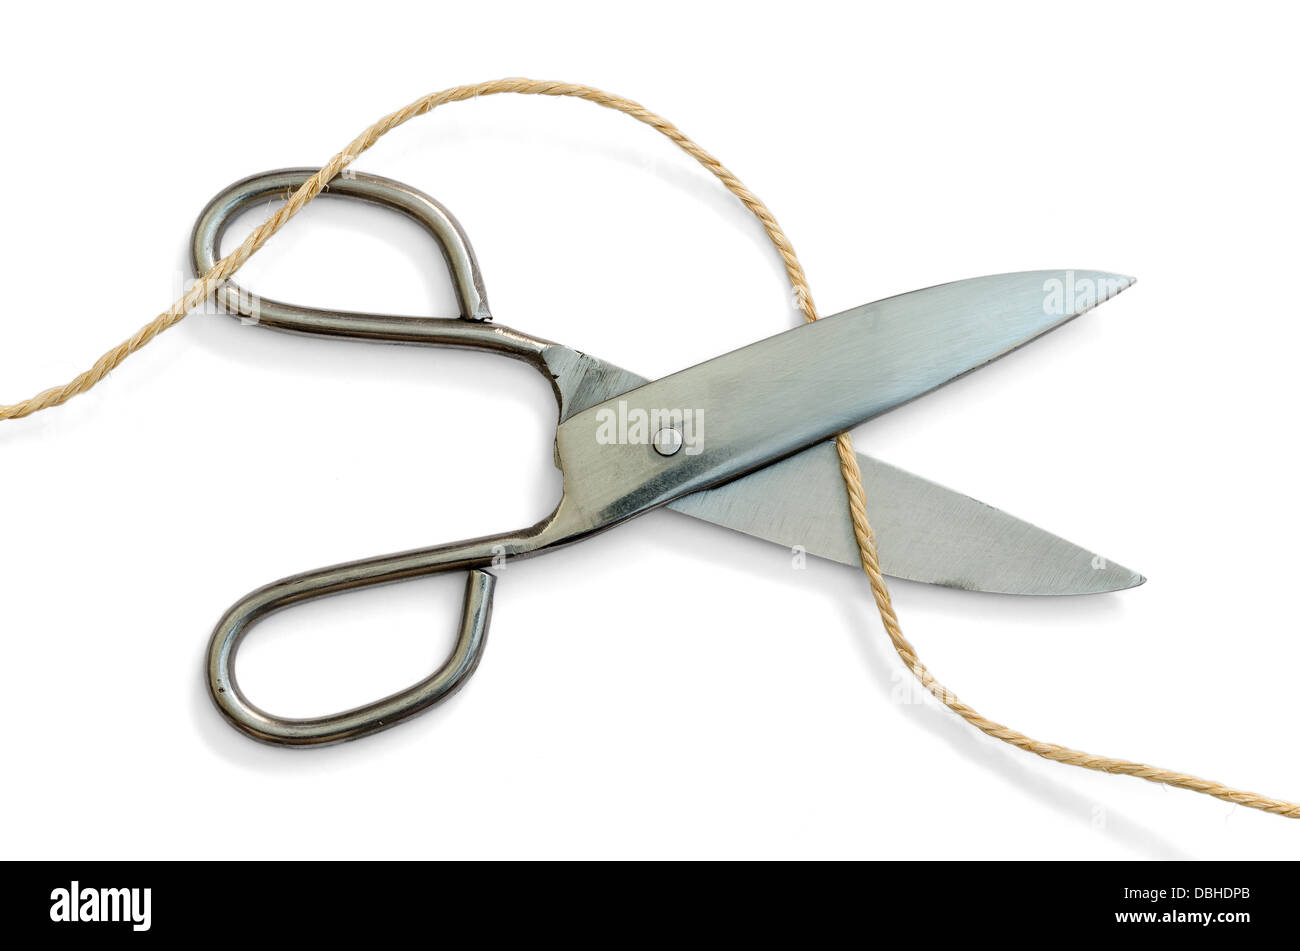 Scissors and cutting board for crafts Stock Photo - Alamy